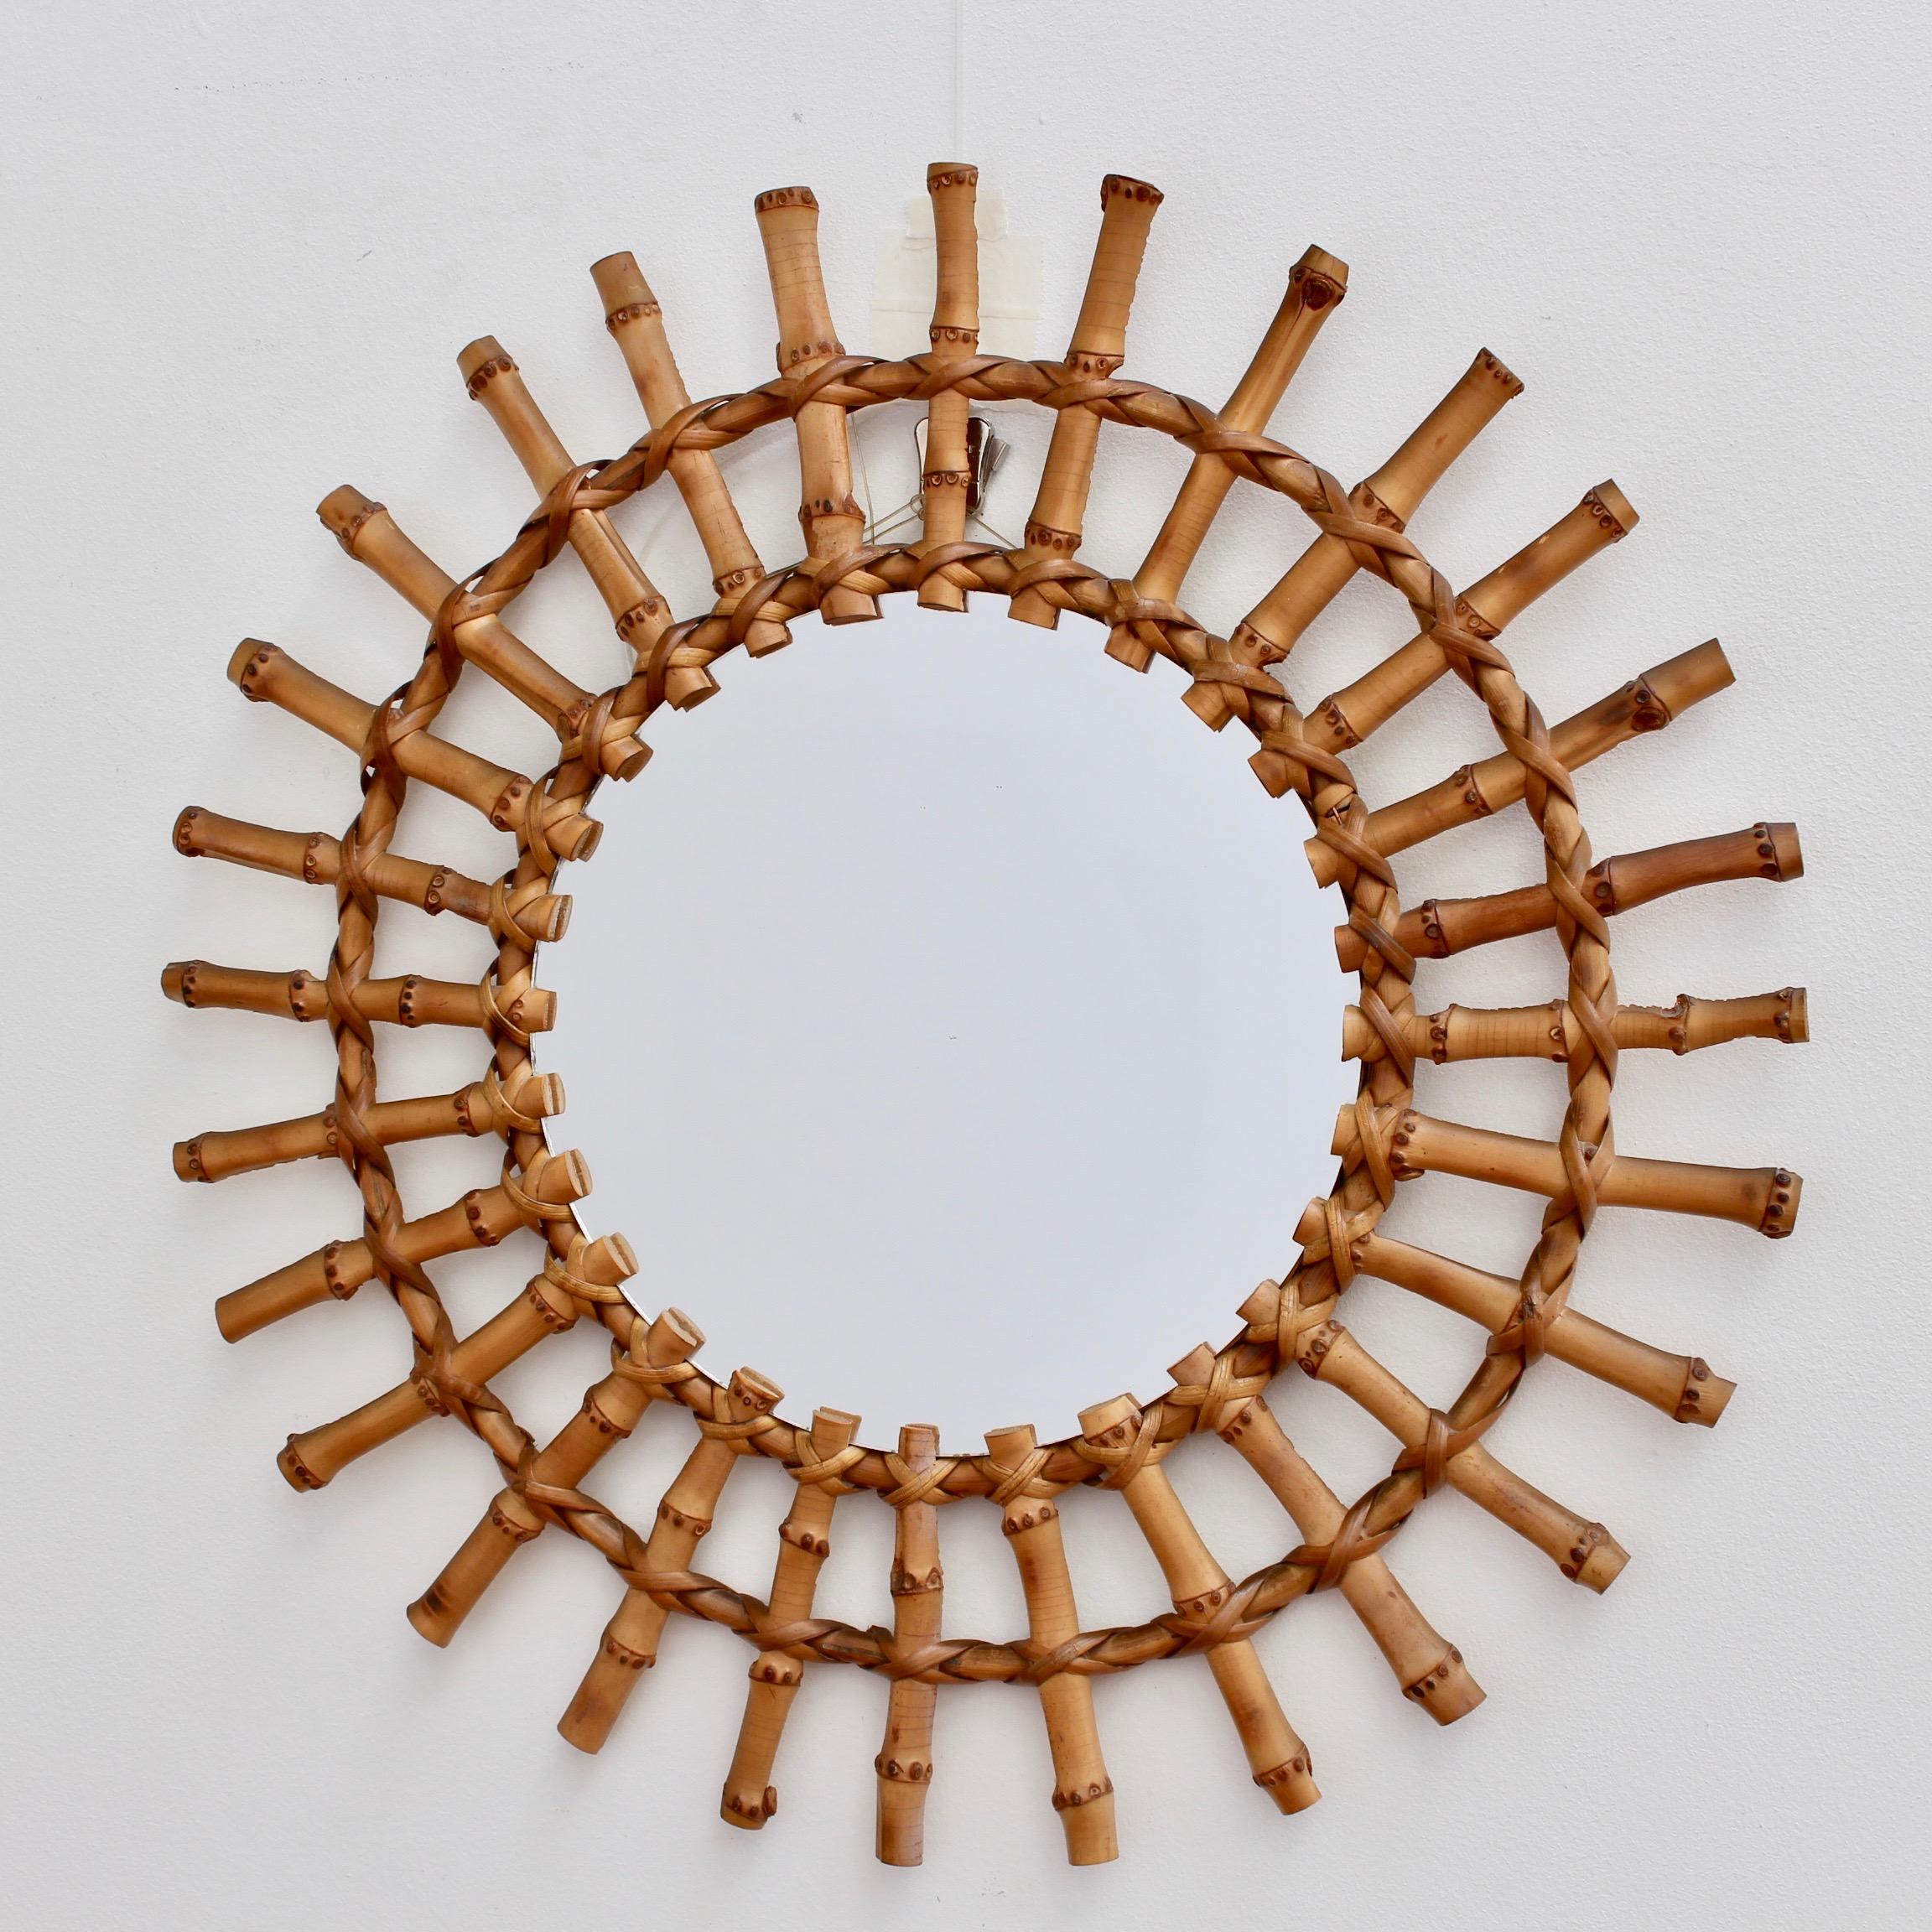 Midcentury French bamboo sunburst mirror (circa 1960s) with classic features and a charming aged patina making this very collectible. The mirror is in very good vintage condition consistent with its age and use. Upon request a video of the piece